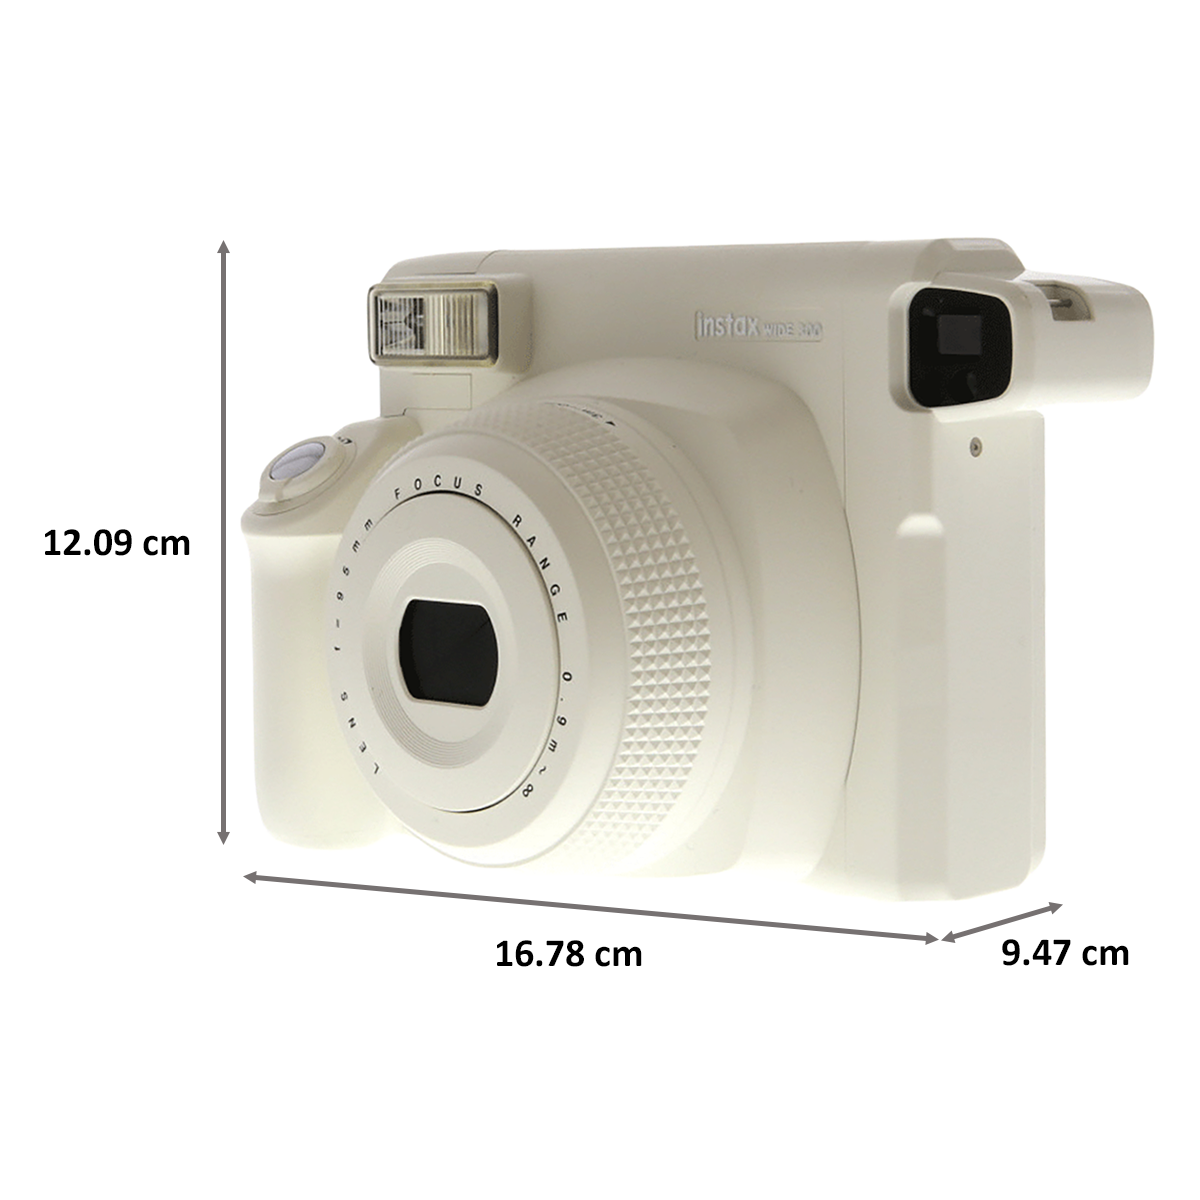 Buy Fujifilm Instax WIDE 300 Instant Camera (Wider Frame Fit, White) Online  - Croma